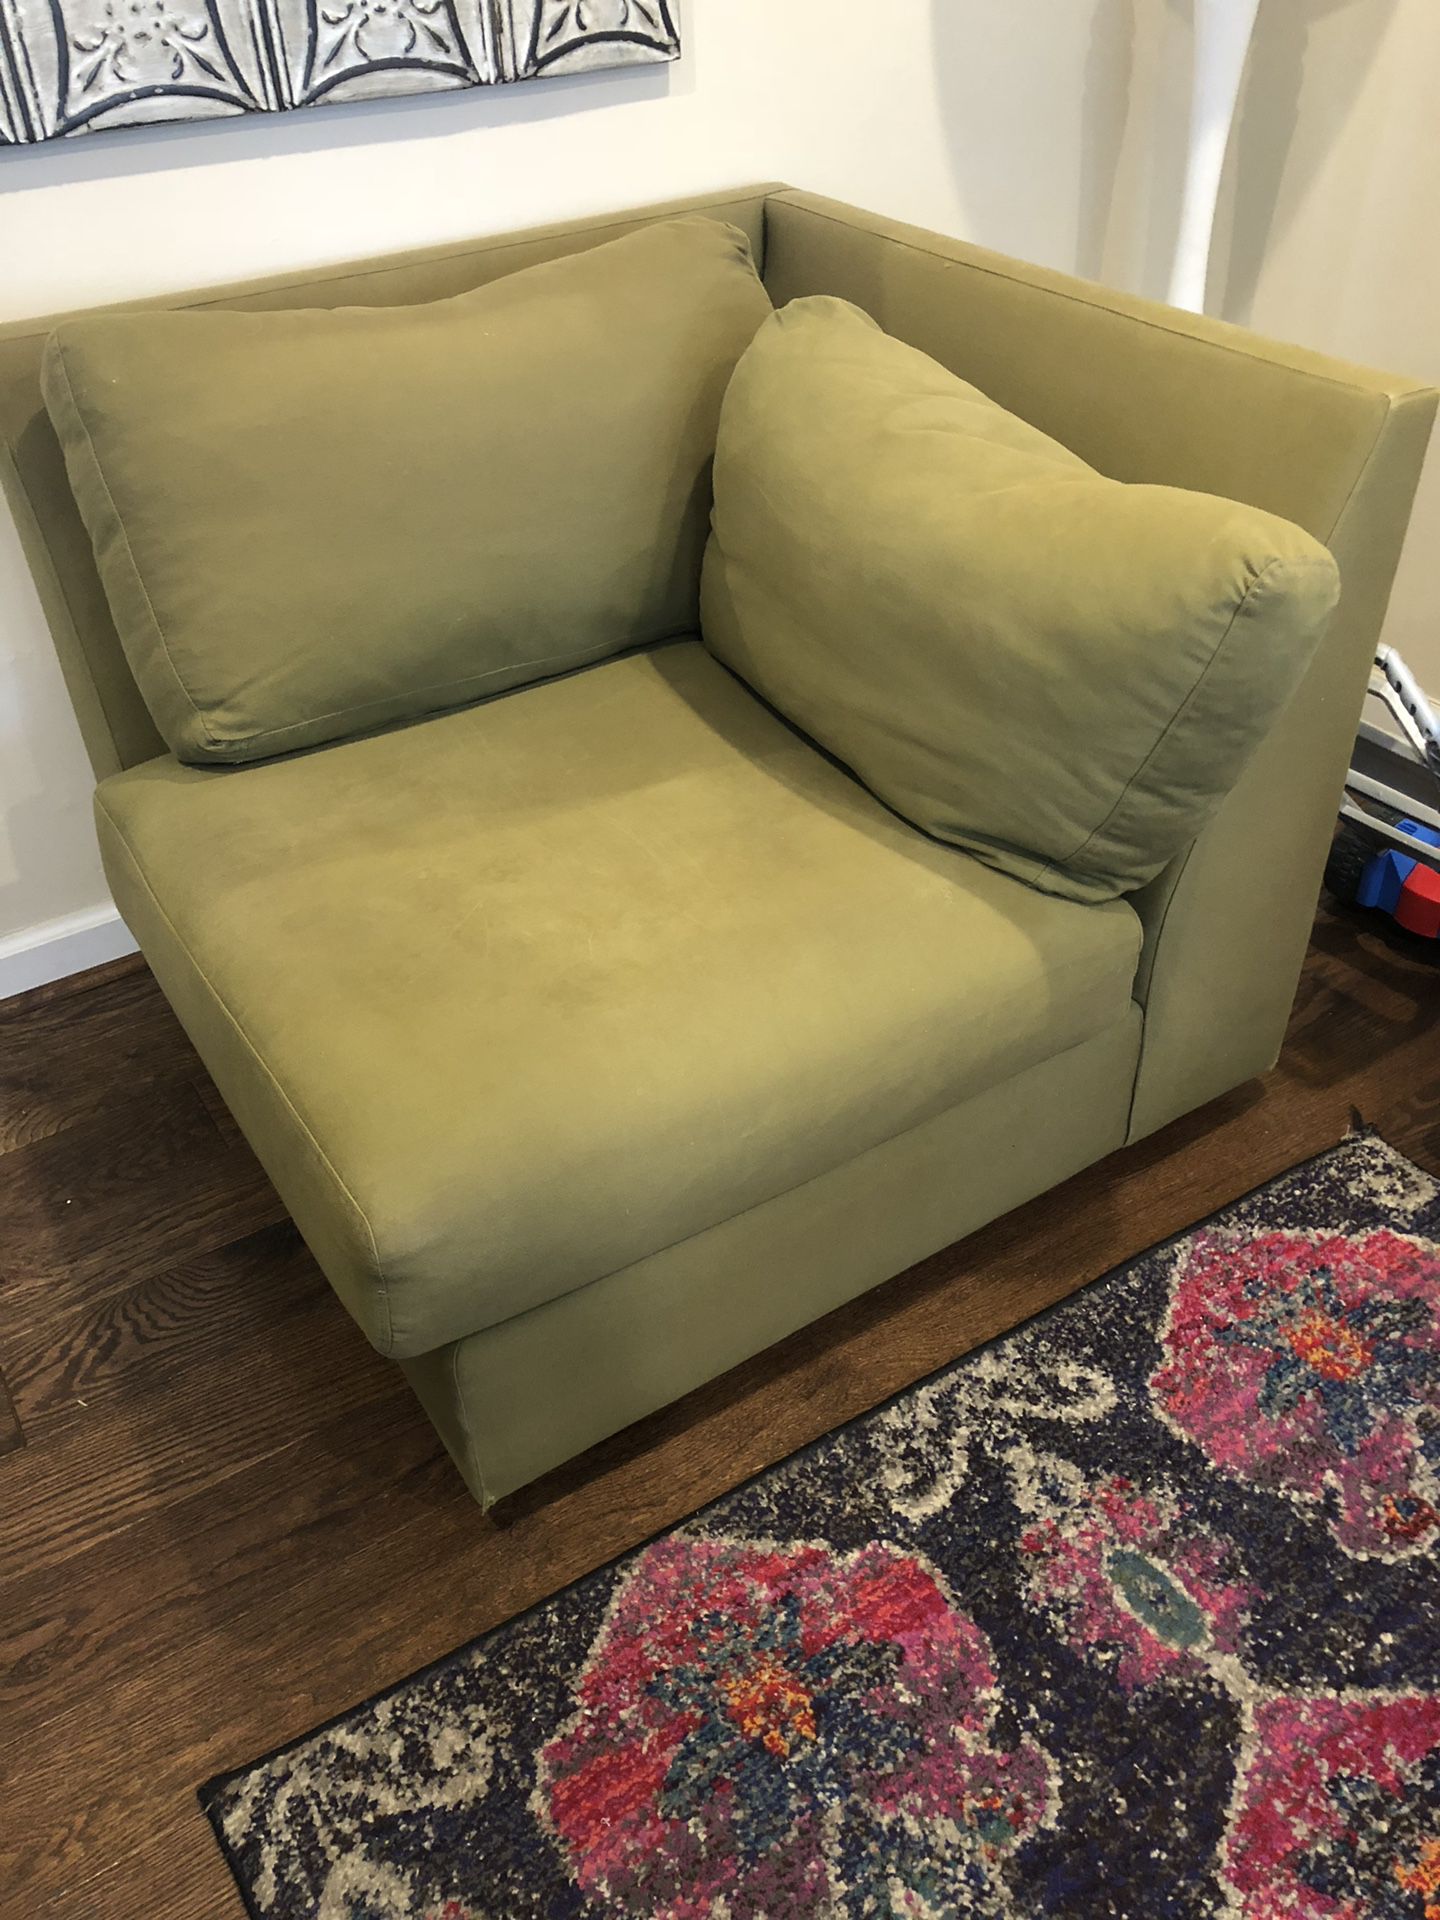 Cube alert- Free Crate and Barrel Corner Couch Piece